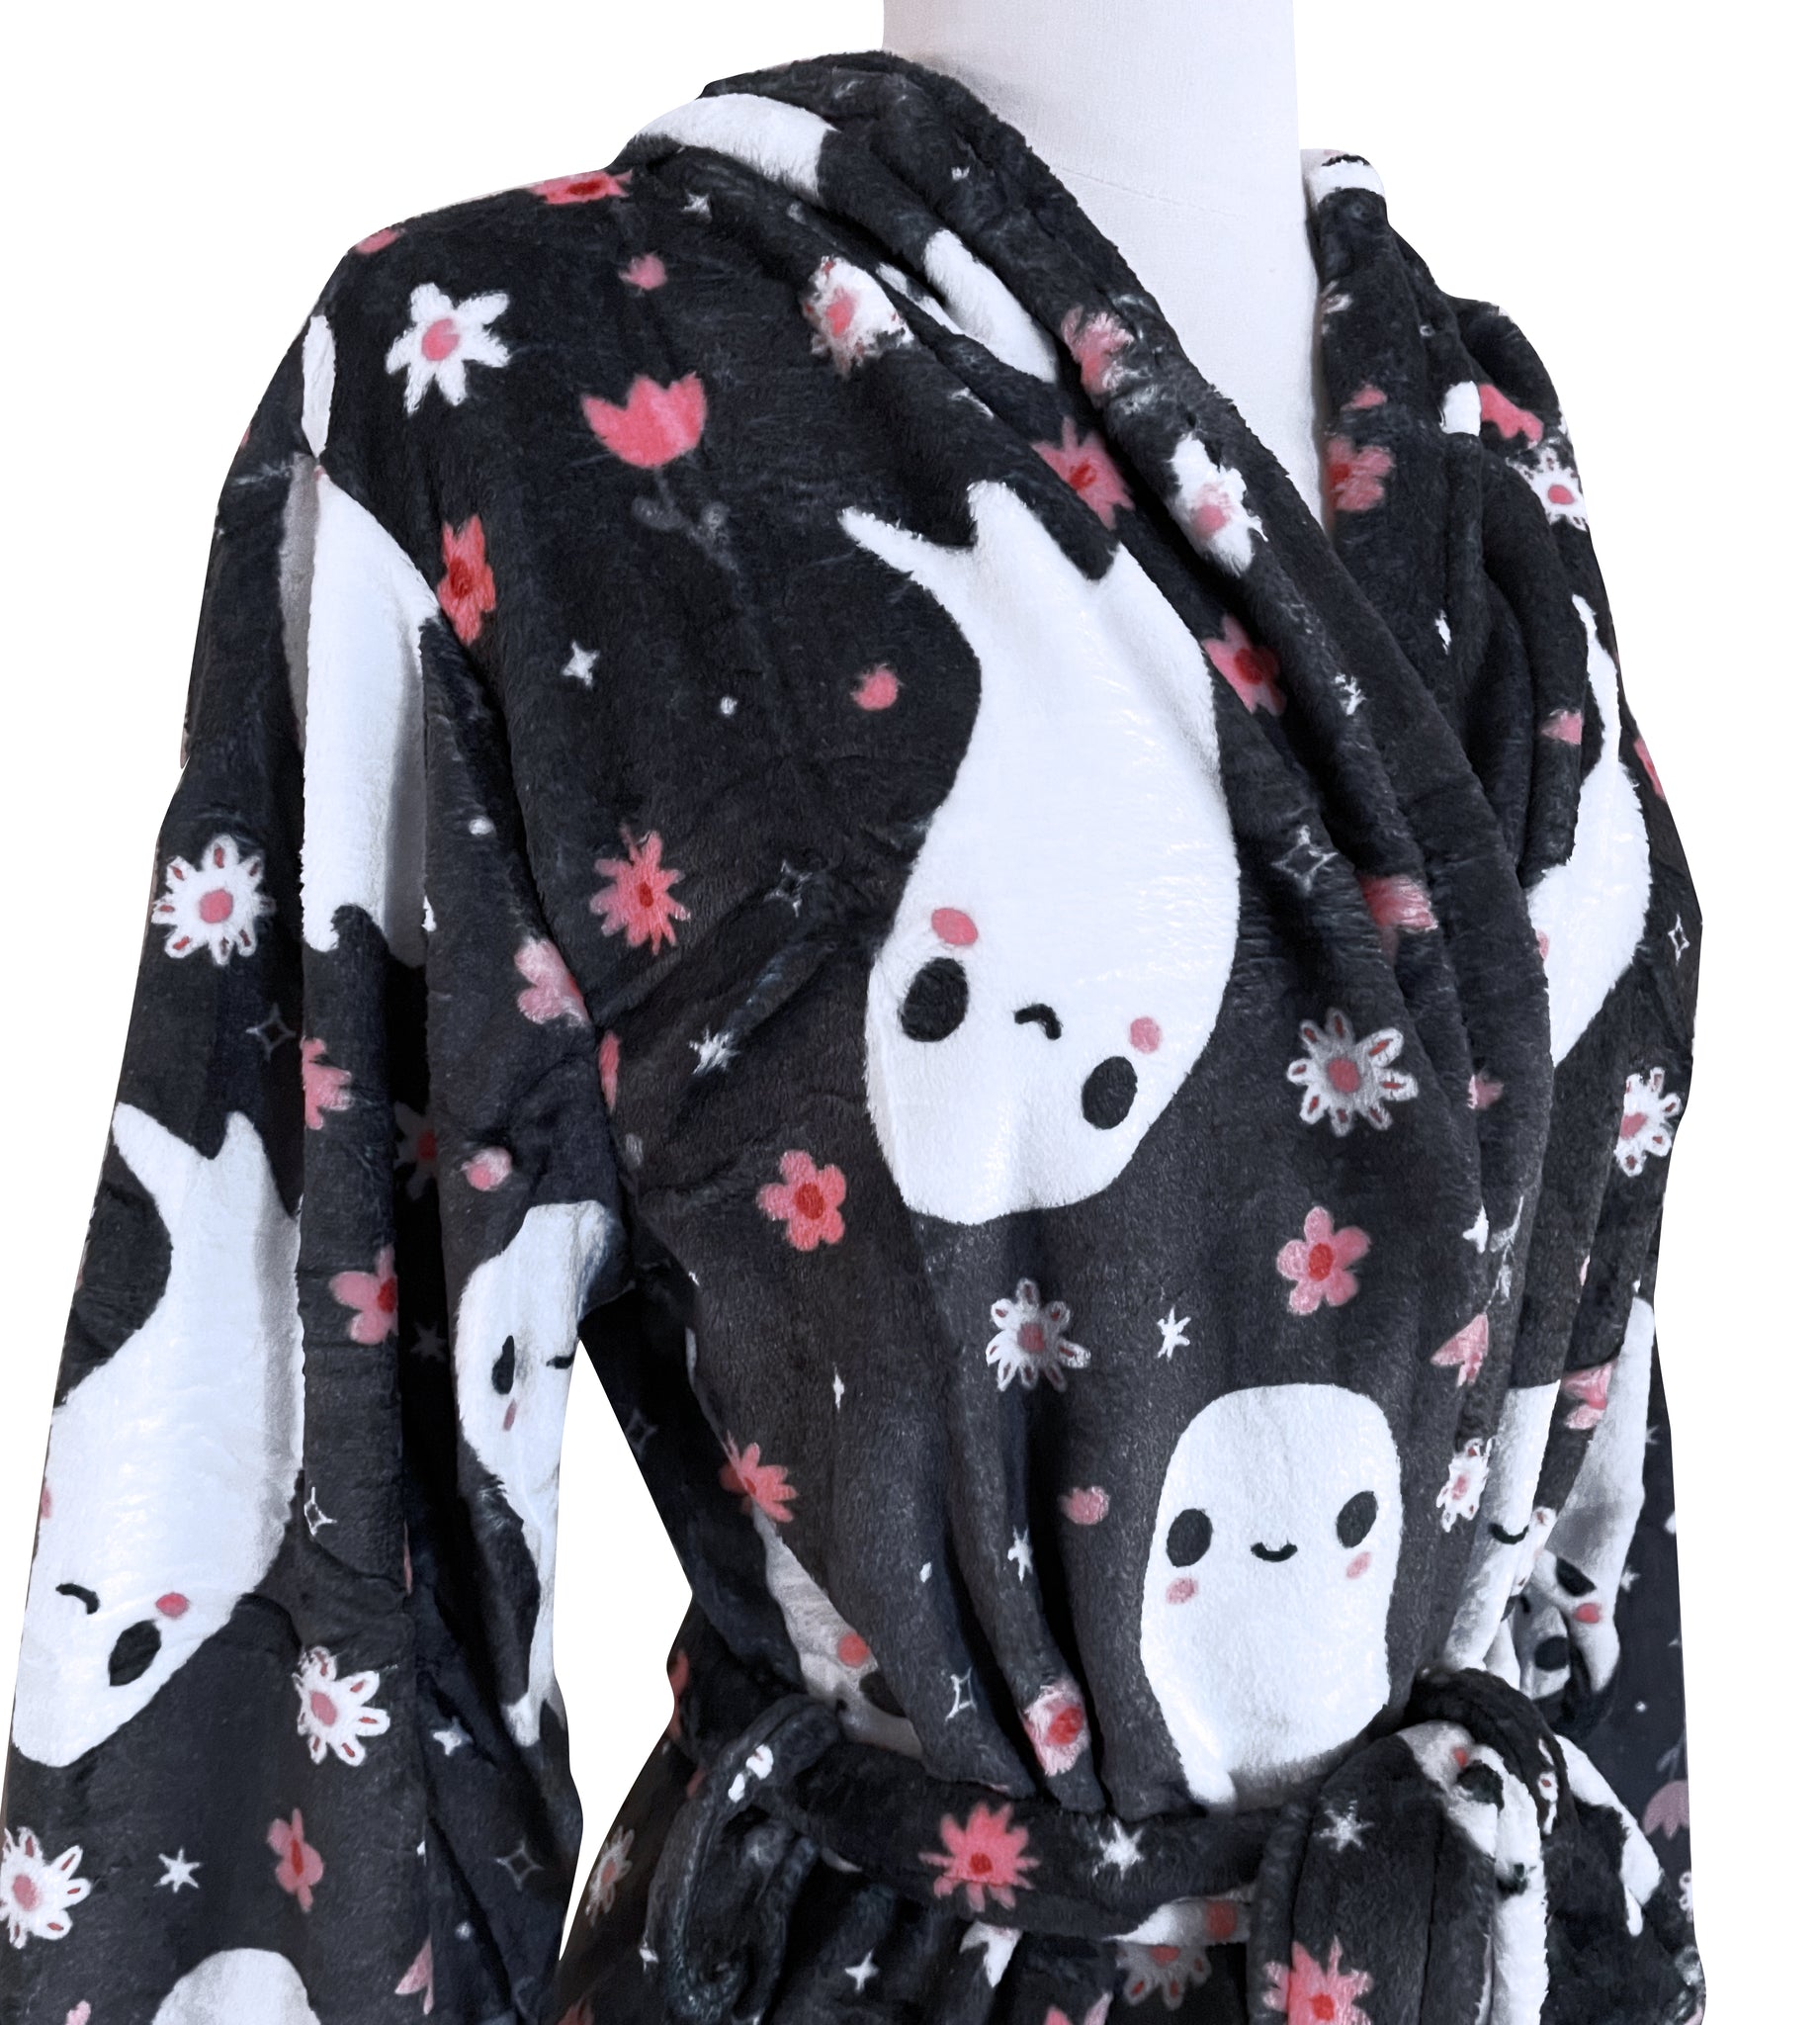 Hooded Floral Ghosts Fleece Robe - Sizes S to 3X